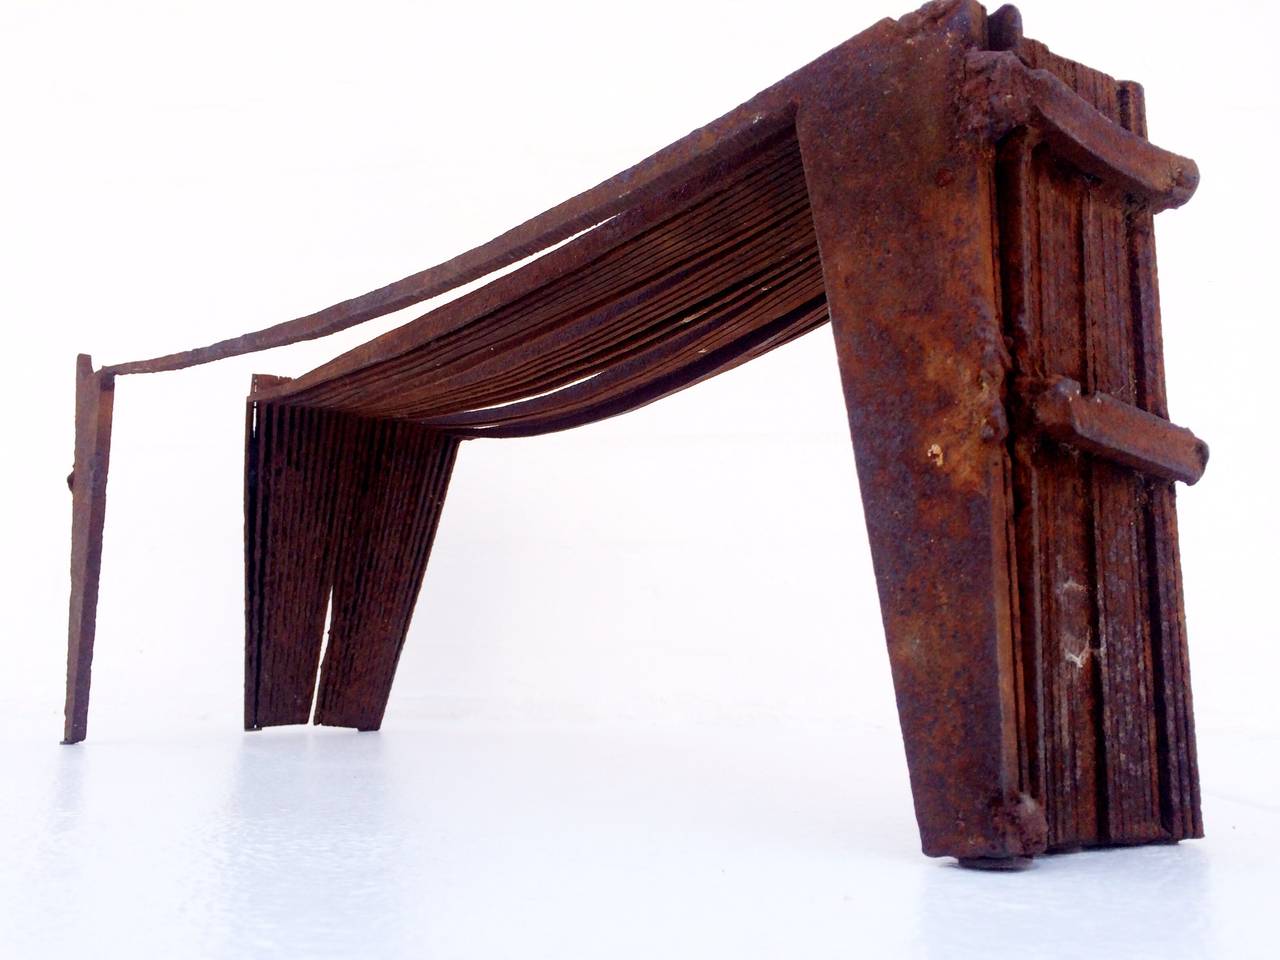 Brutalist Welded Steel Sculpture by California Artist Paul Kasper In Excellent Condition For Sale In Palm Springs, CA